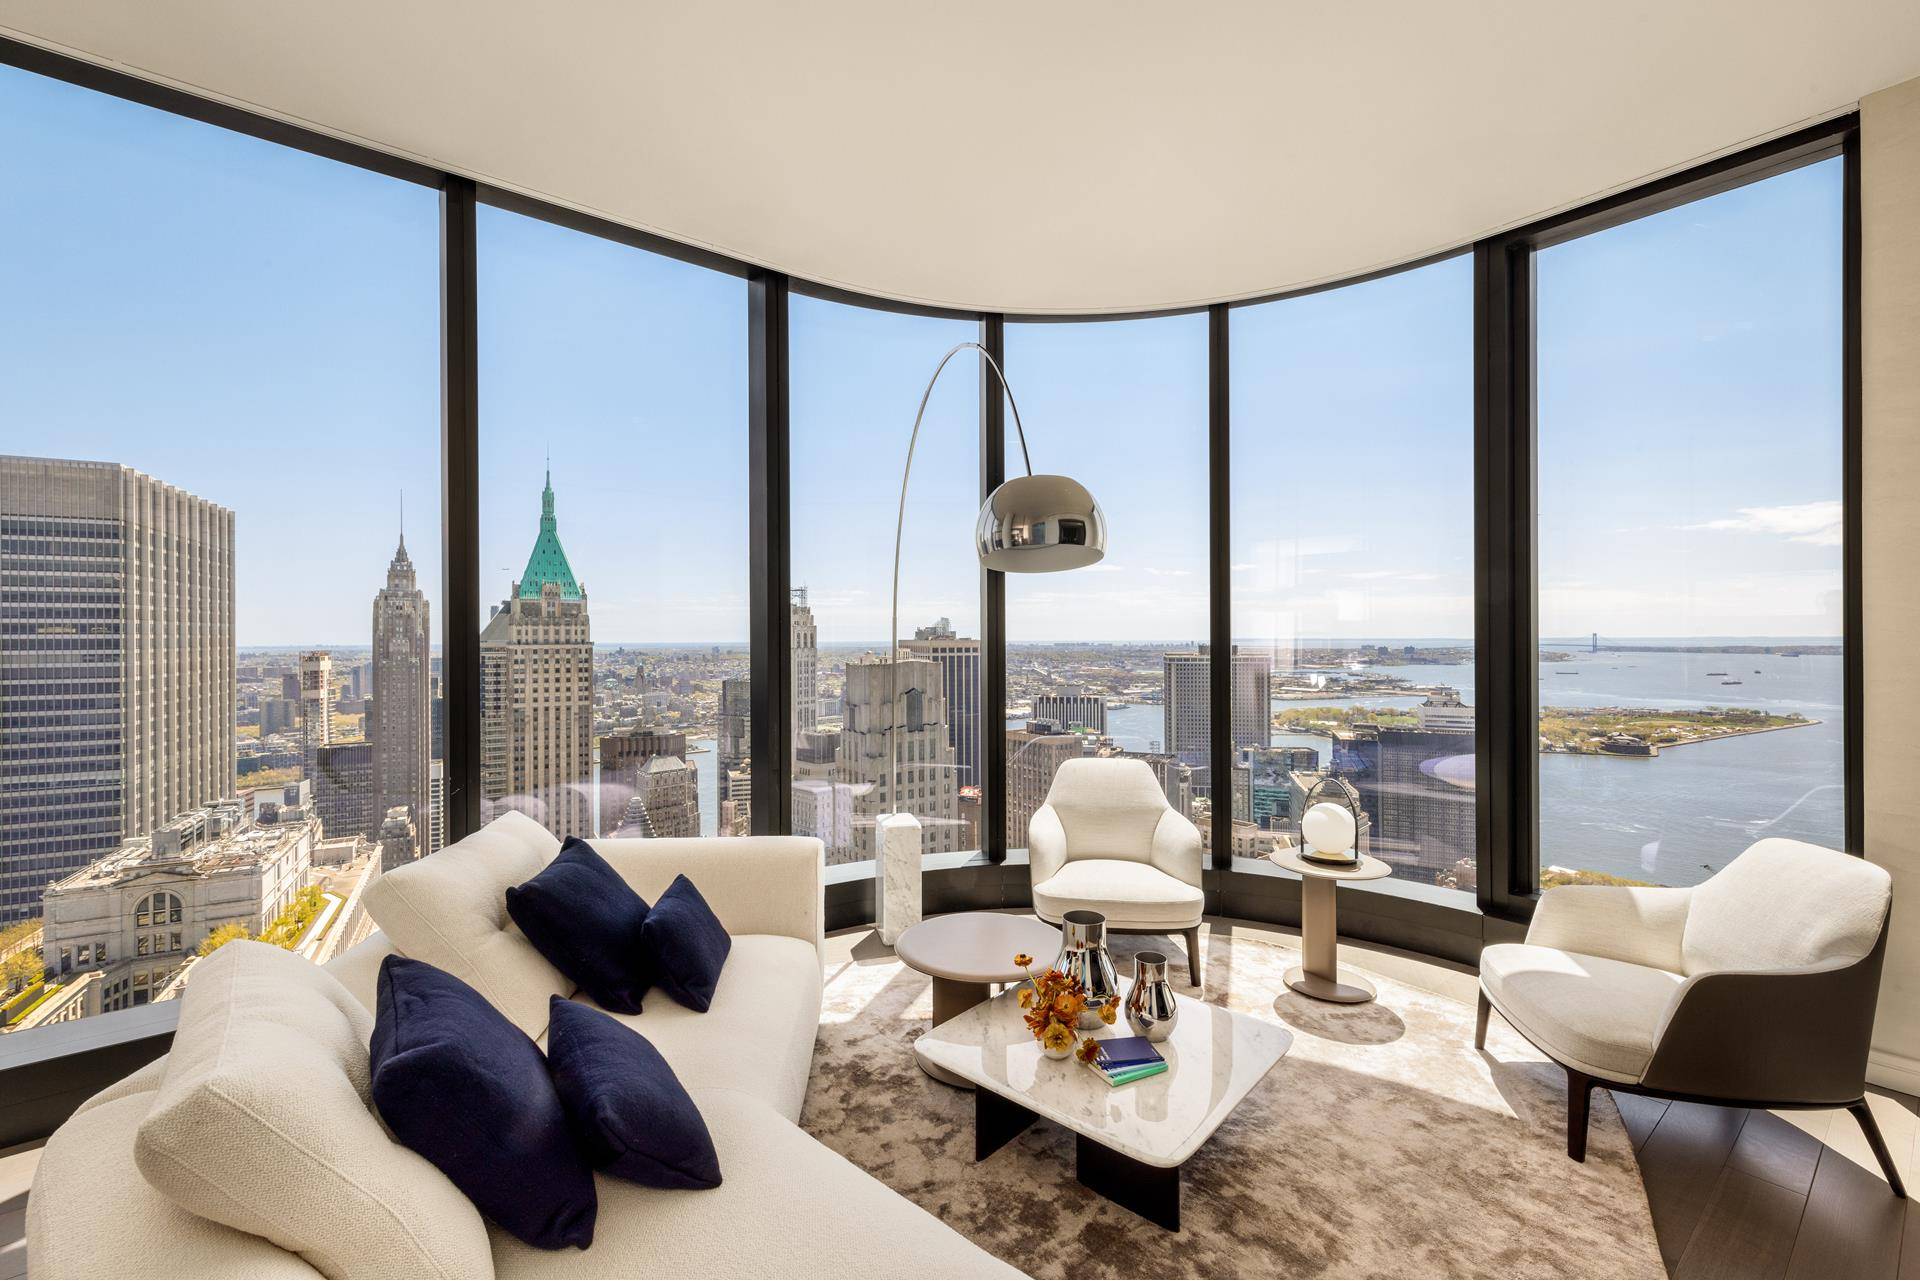 Enter Residence 68D at The Greenwich by Rafael Vi oly, a one bedroom, one and a half bathroom with magnificent southern and western views from the floor to ceiling windows.